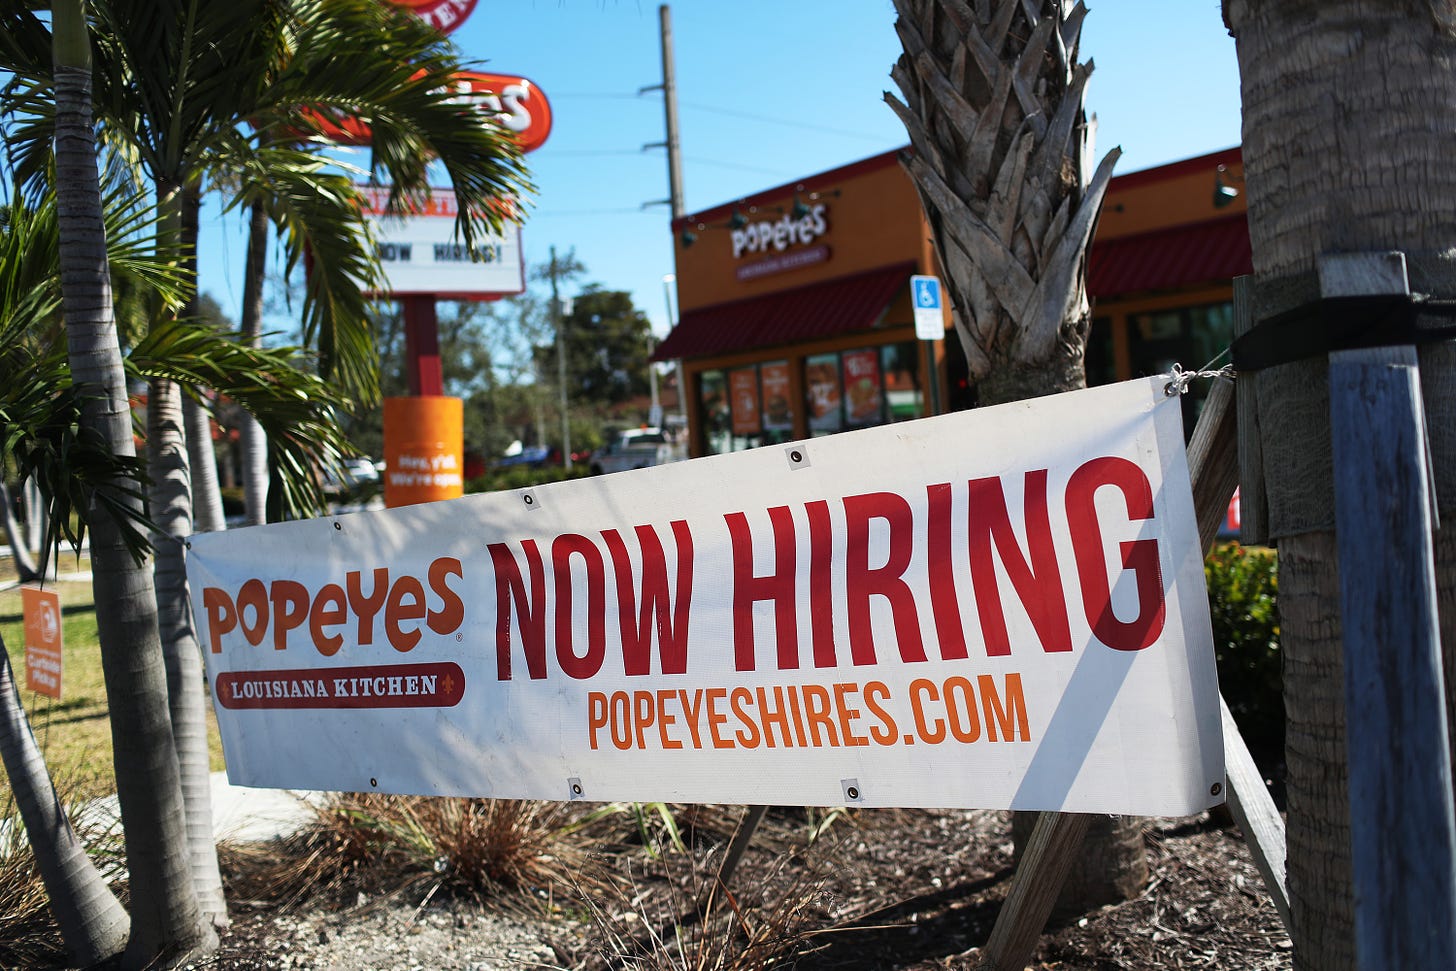 A 'Now Hiring' sign hangs in front of a Popeye's restaurant on February 04, 2021 in Miami, Florida